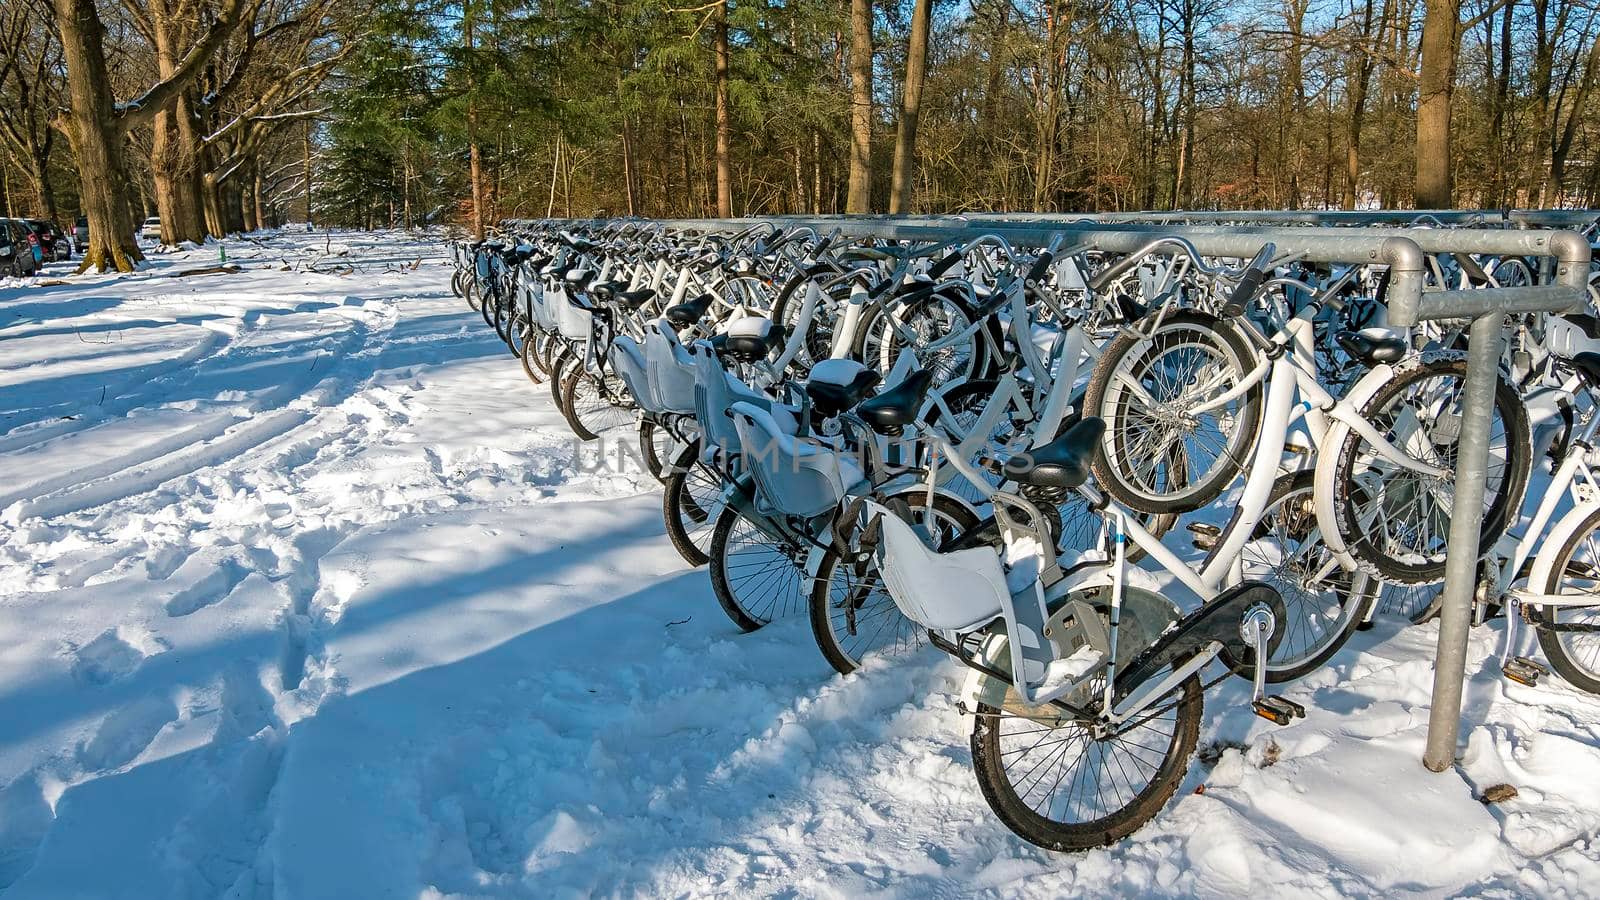 Lots of snowy bikes on national park de Hoge Veluwe in the Netherlands in winter